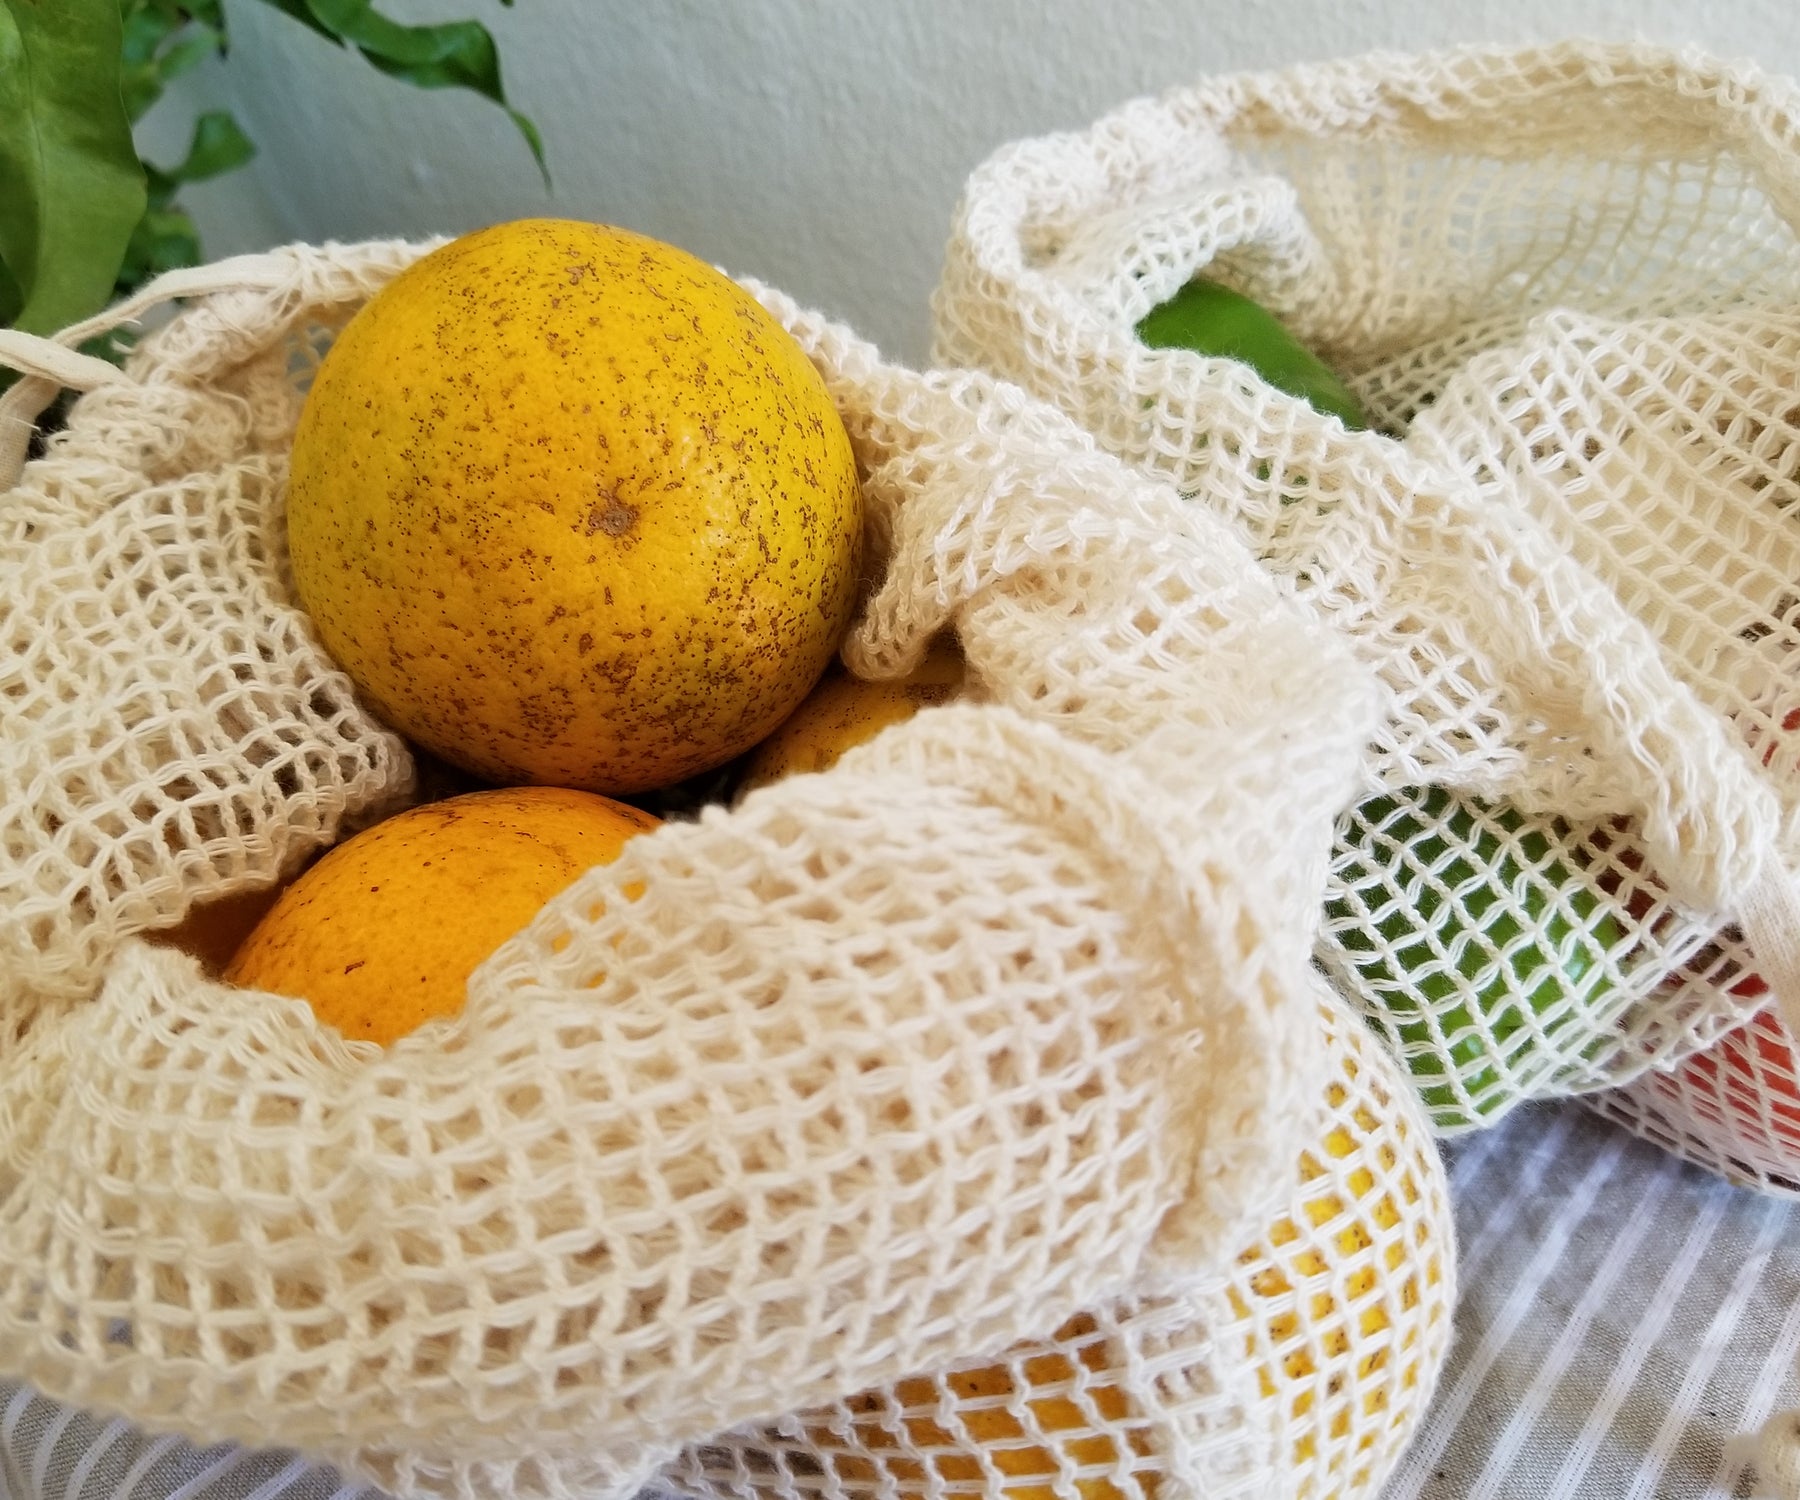 STOP Plastic Produce Bags! Switch Now to REUSEABLE Produce Bags